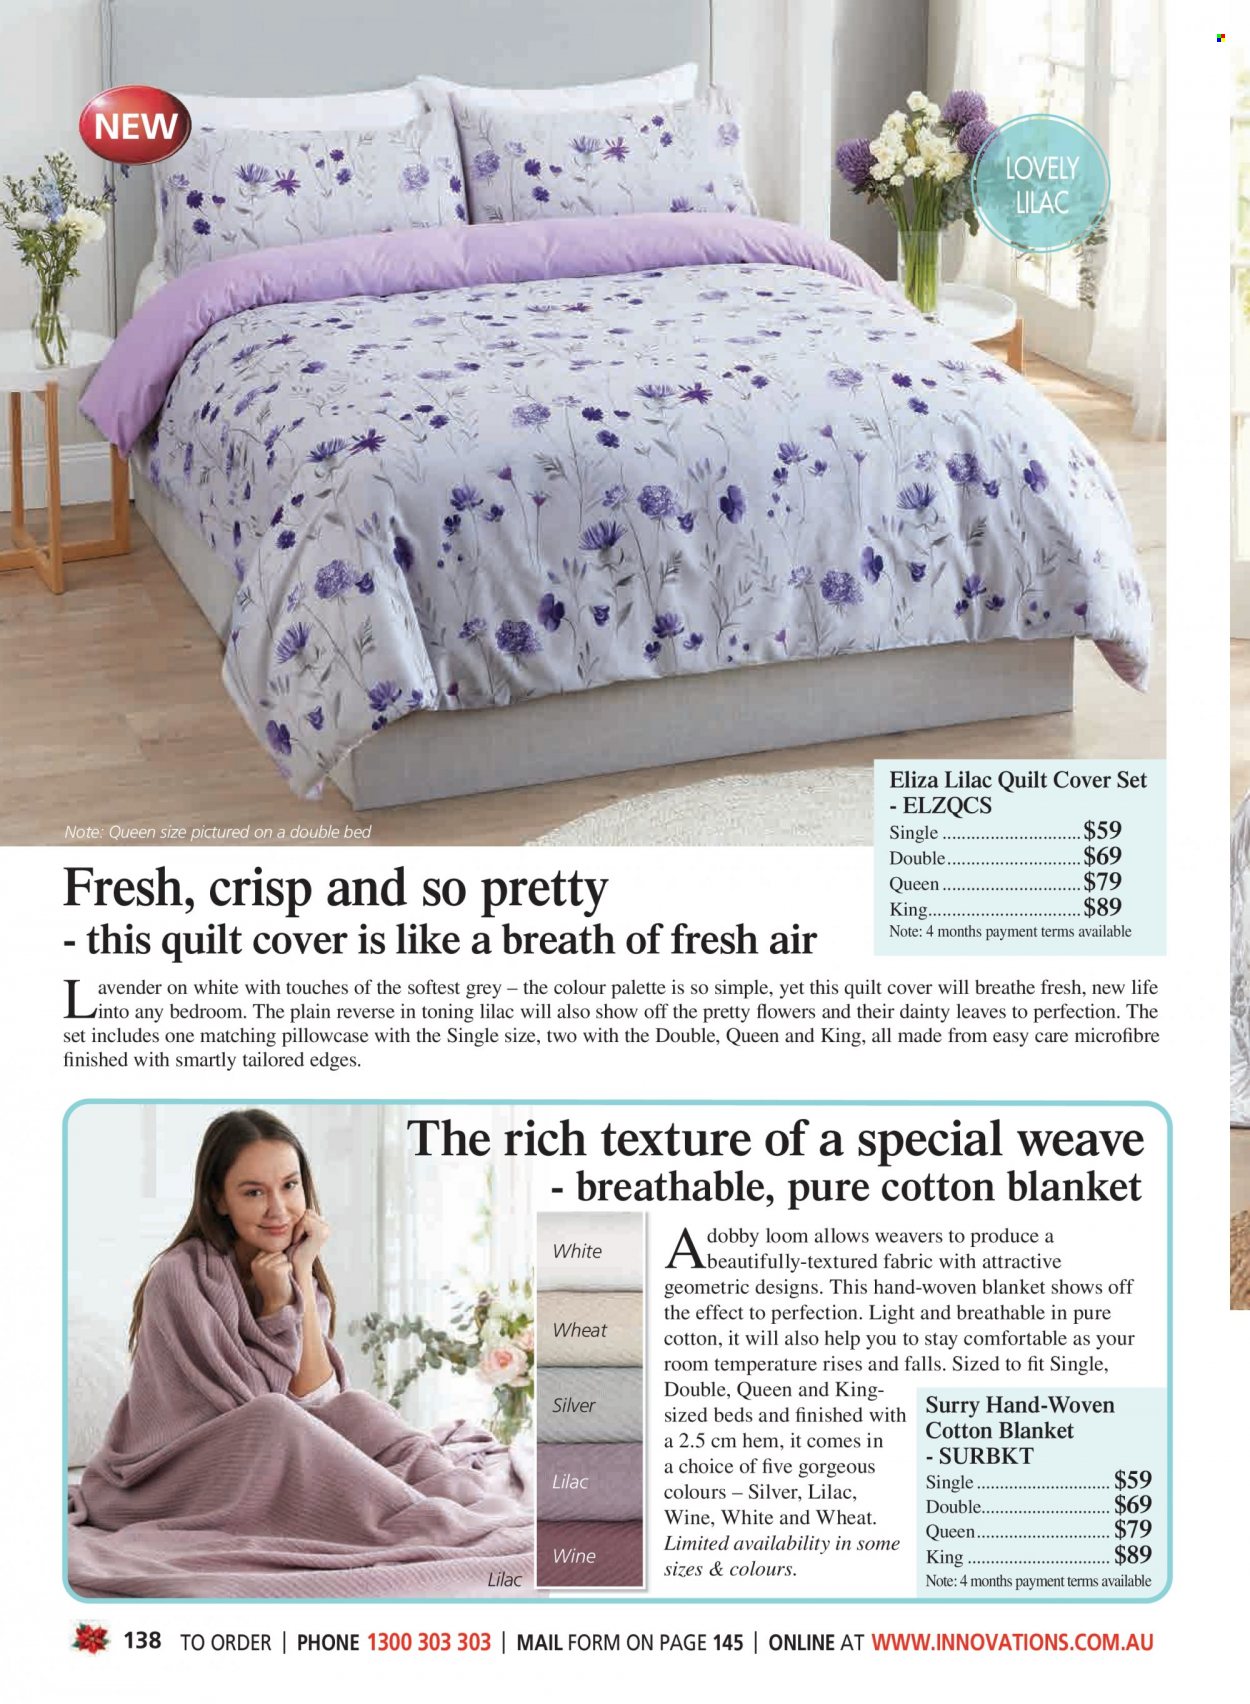 thumbnail - Innovations Catalogue - Sales products - blanket, pillowcase, quilt, quilt cover set. Page 138.